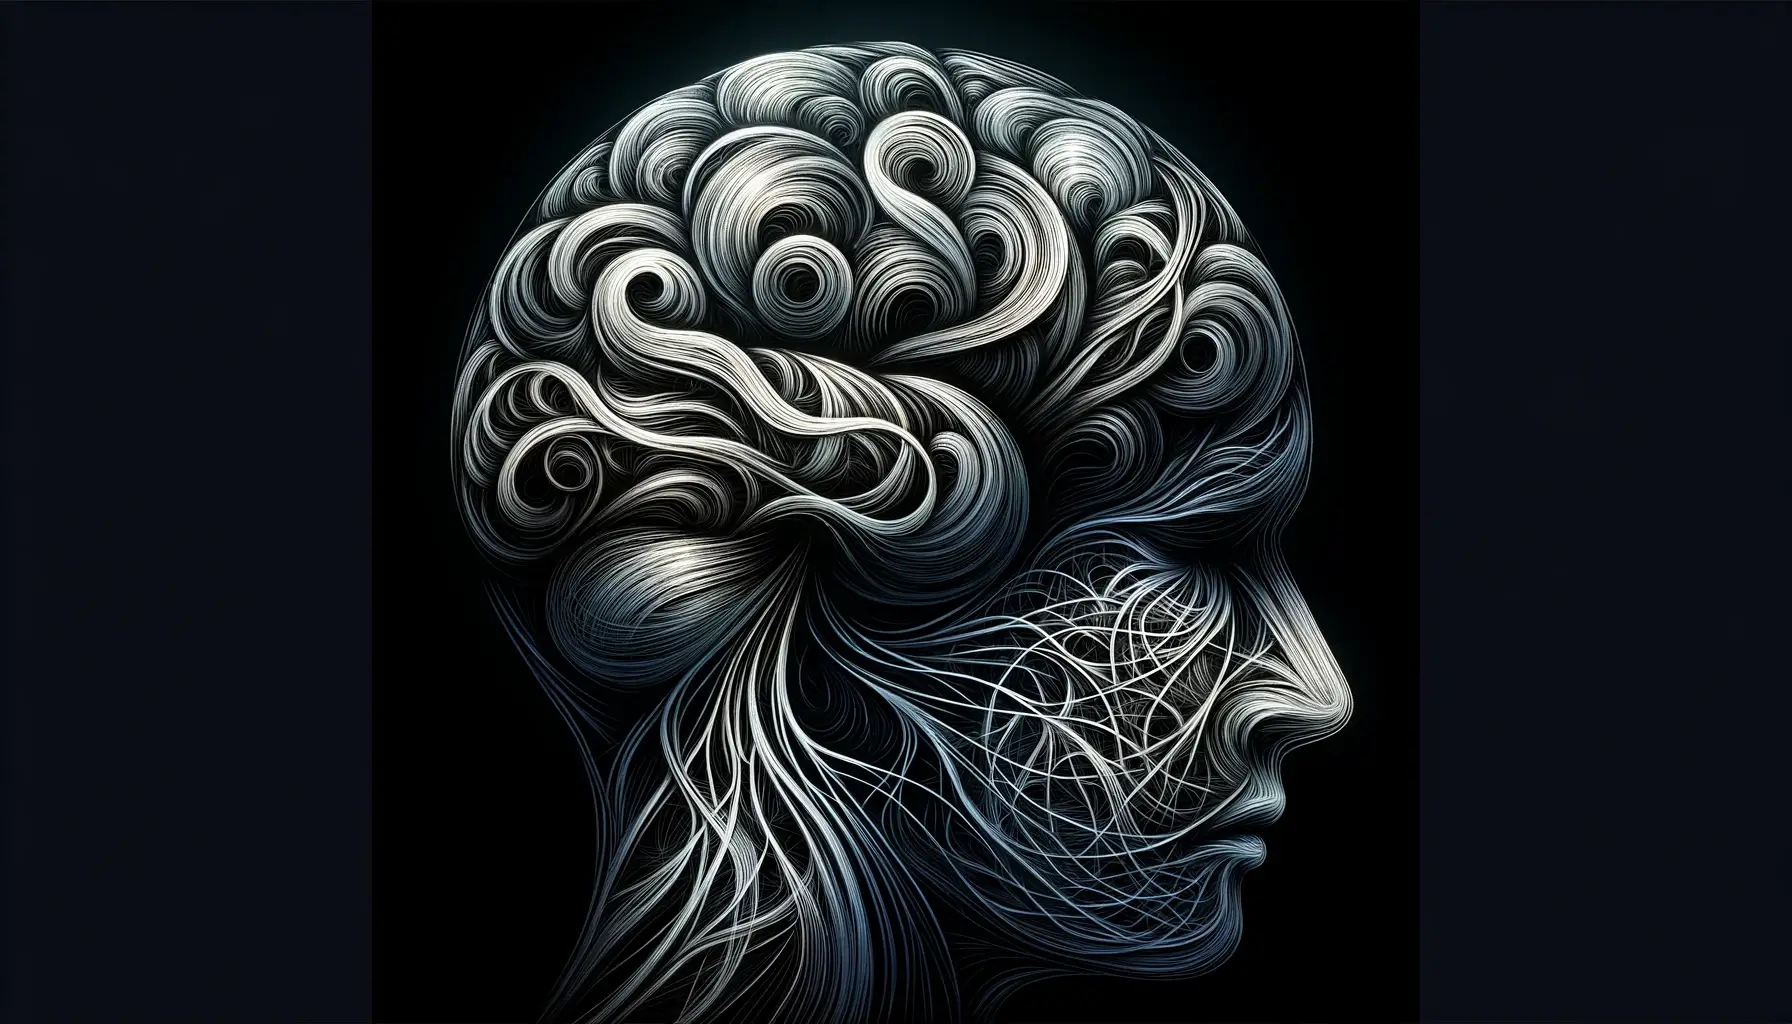 "Artistic representation of mental illness with a complex human brain in intertwined lines and shades symbolizing mental health highs and lows."